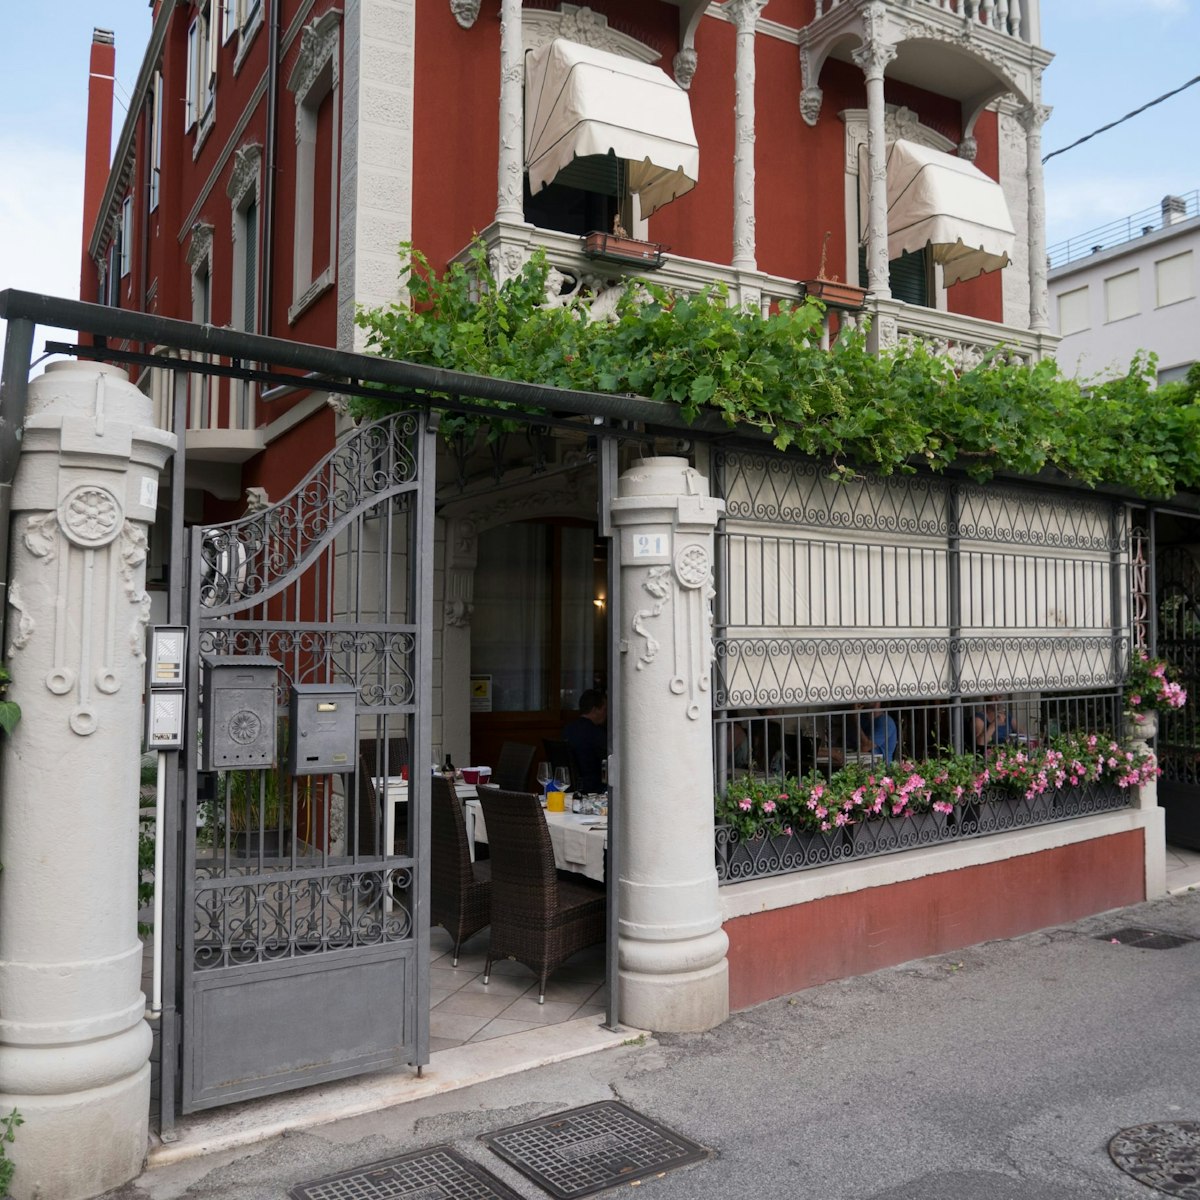 Trattoria Andri stands on a quiet street and has a leafy veranda containing outdoor seating